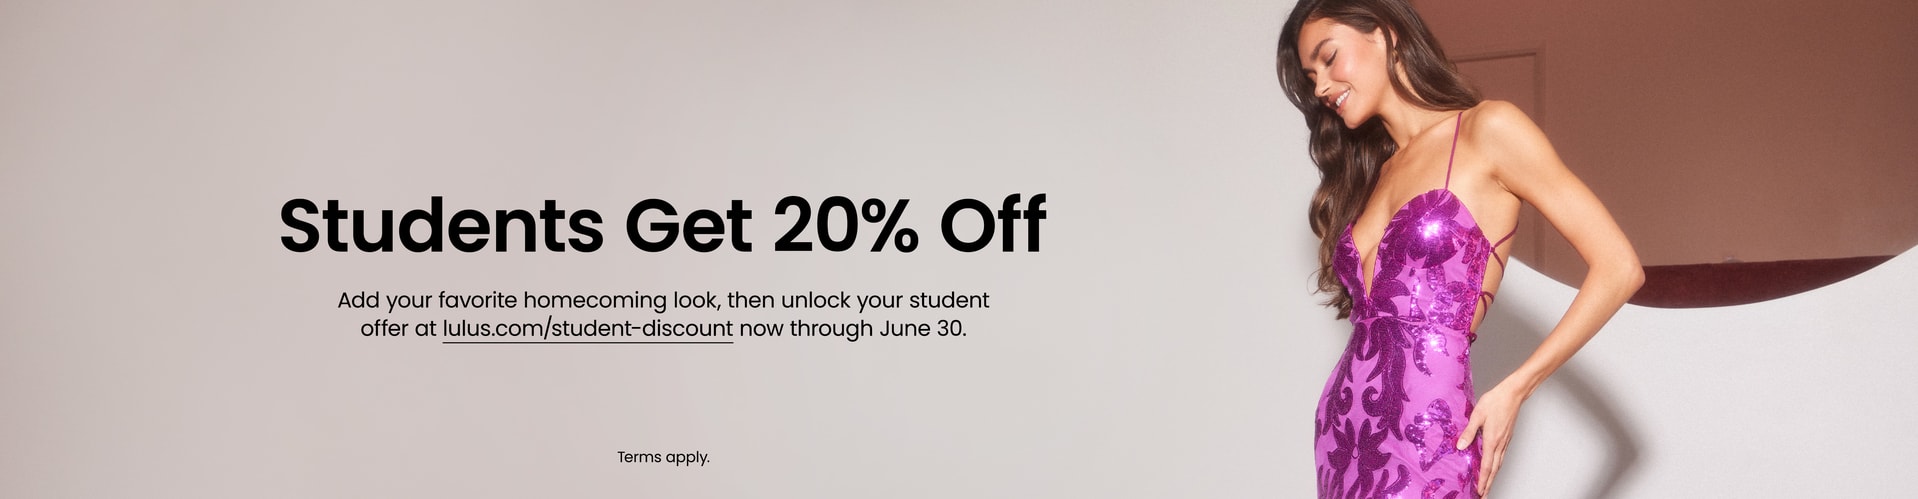 student discount banner